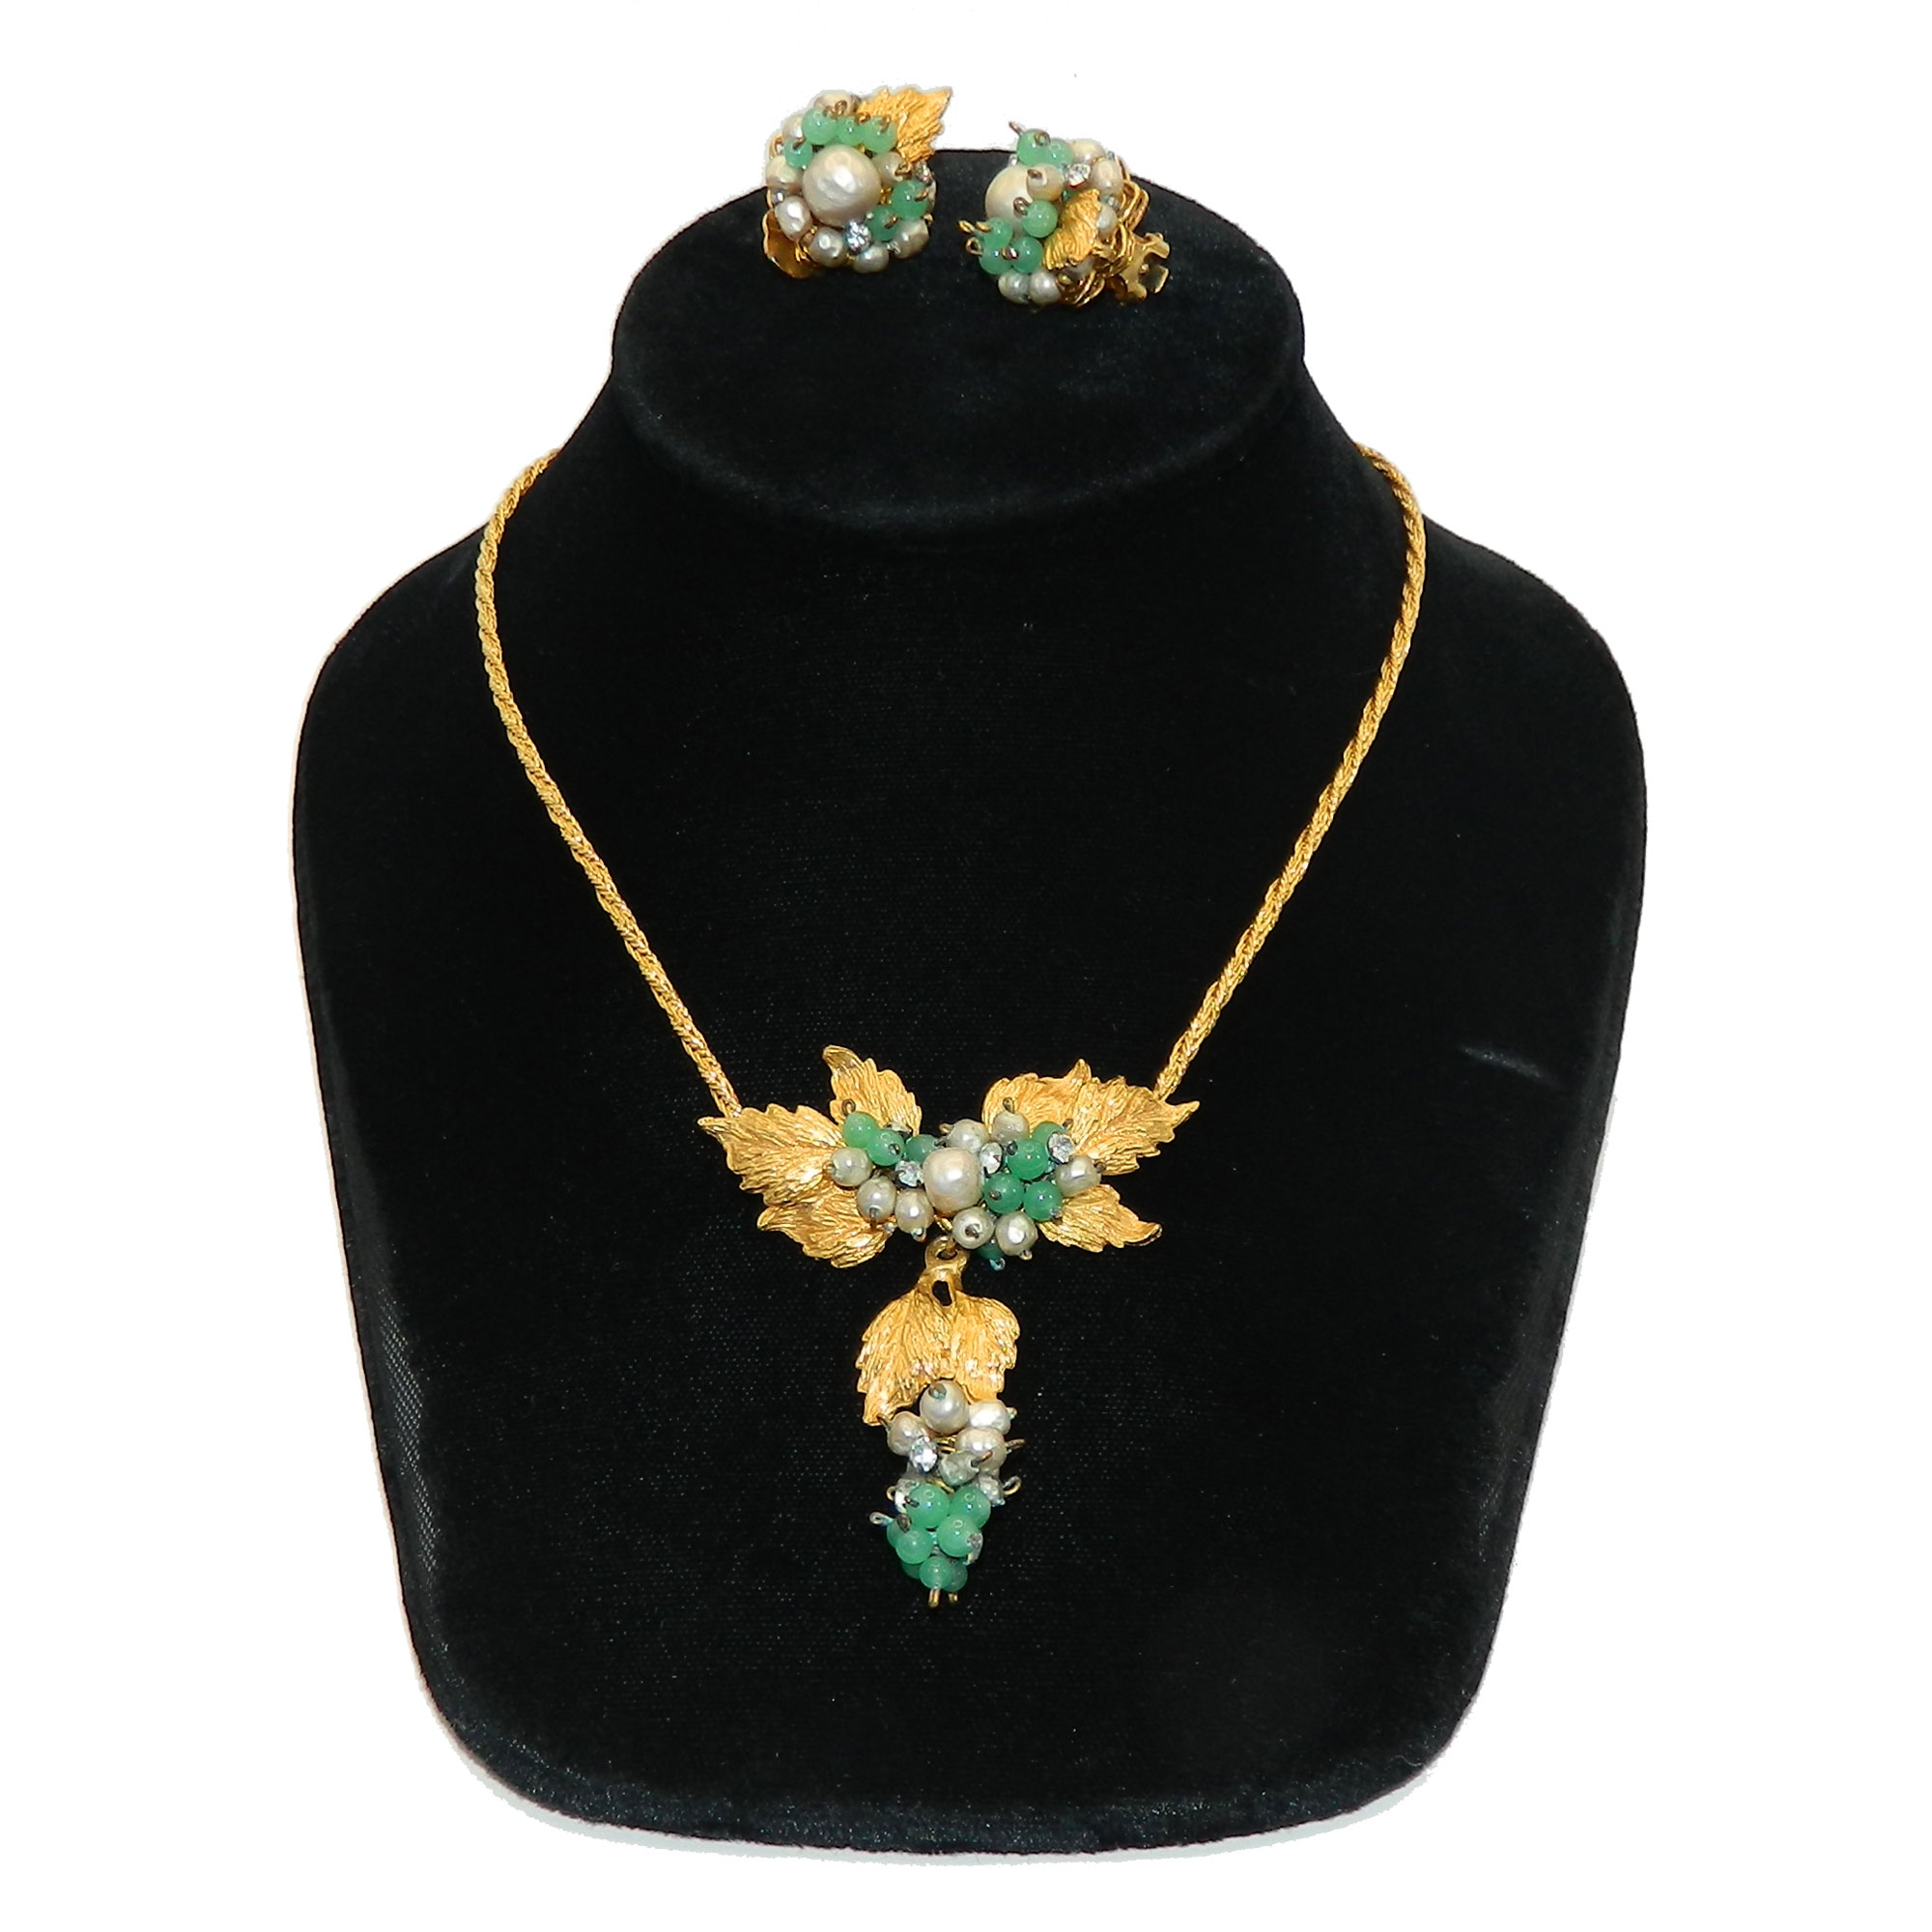 DeMario green grapes necklace and earring set